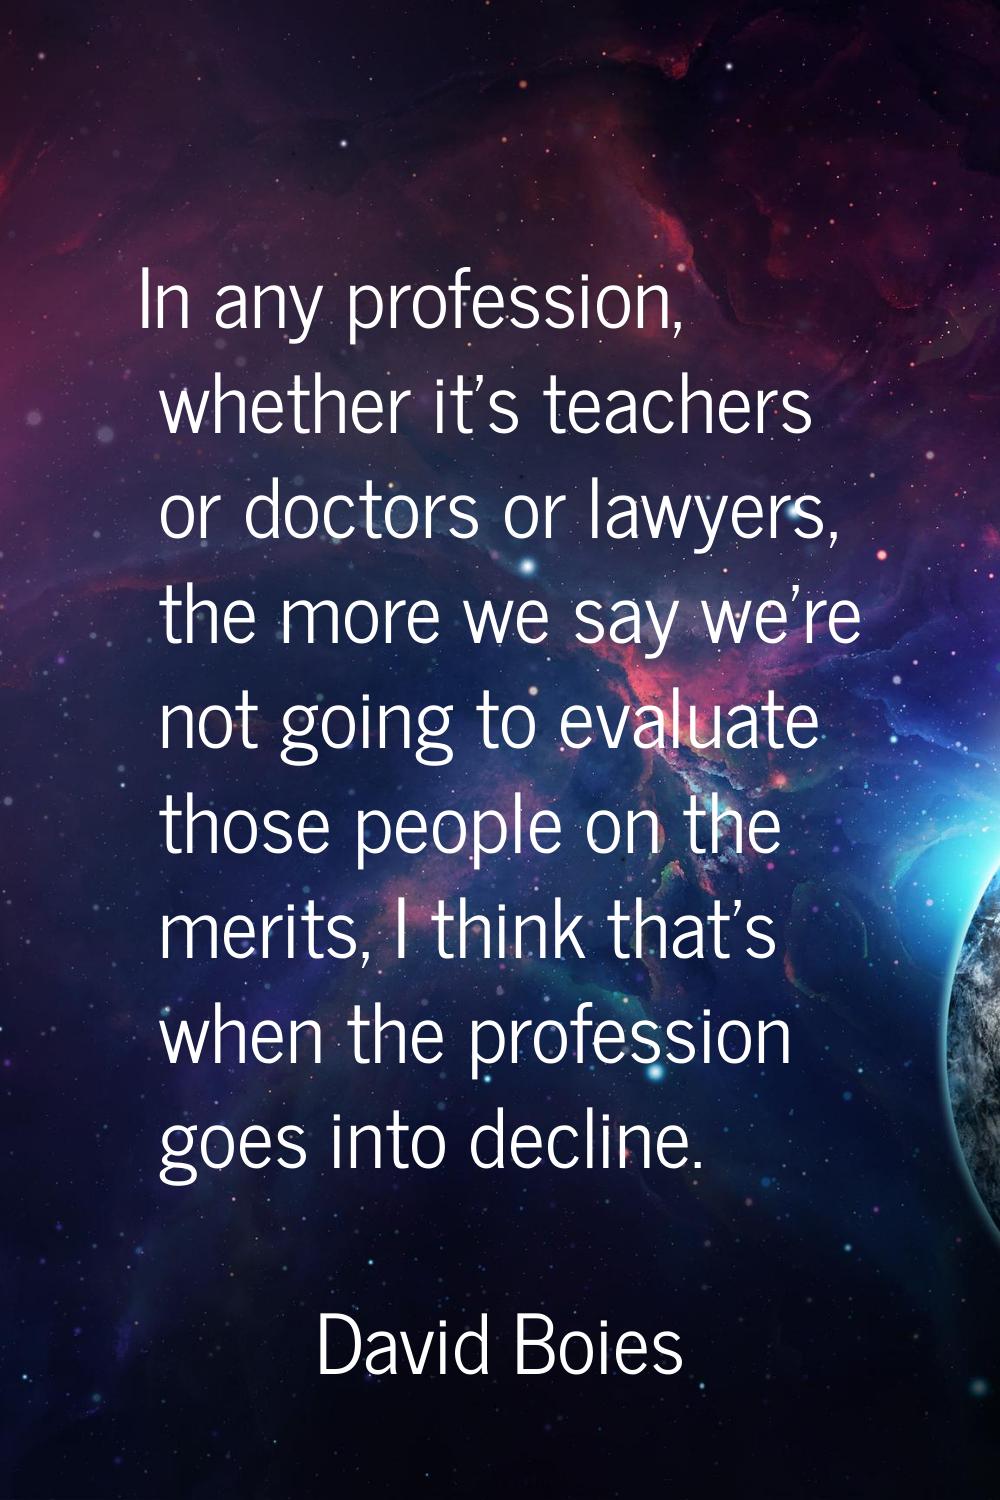 In any profession, whether it's teachers or doctors or lawyers, the more we say we're not going to 